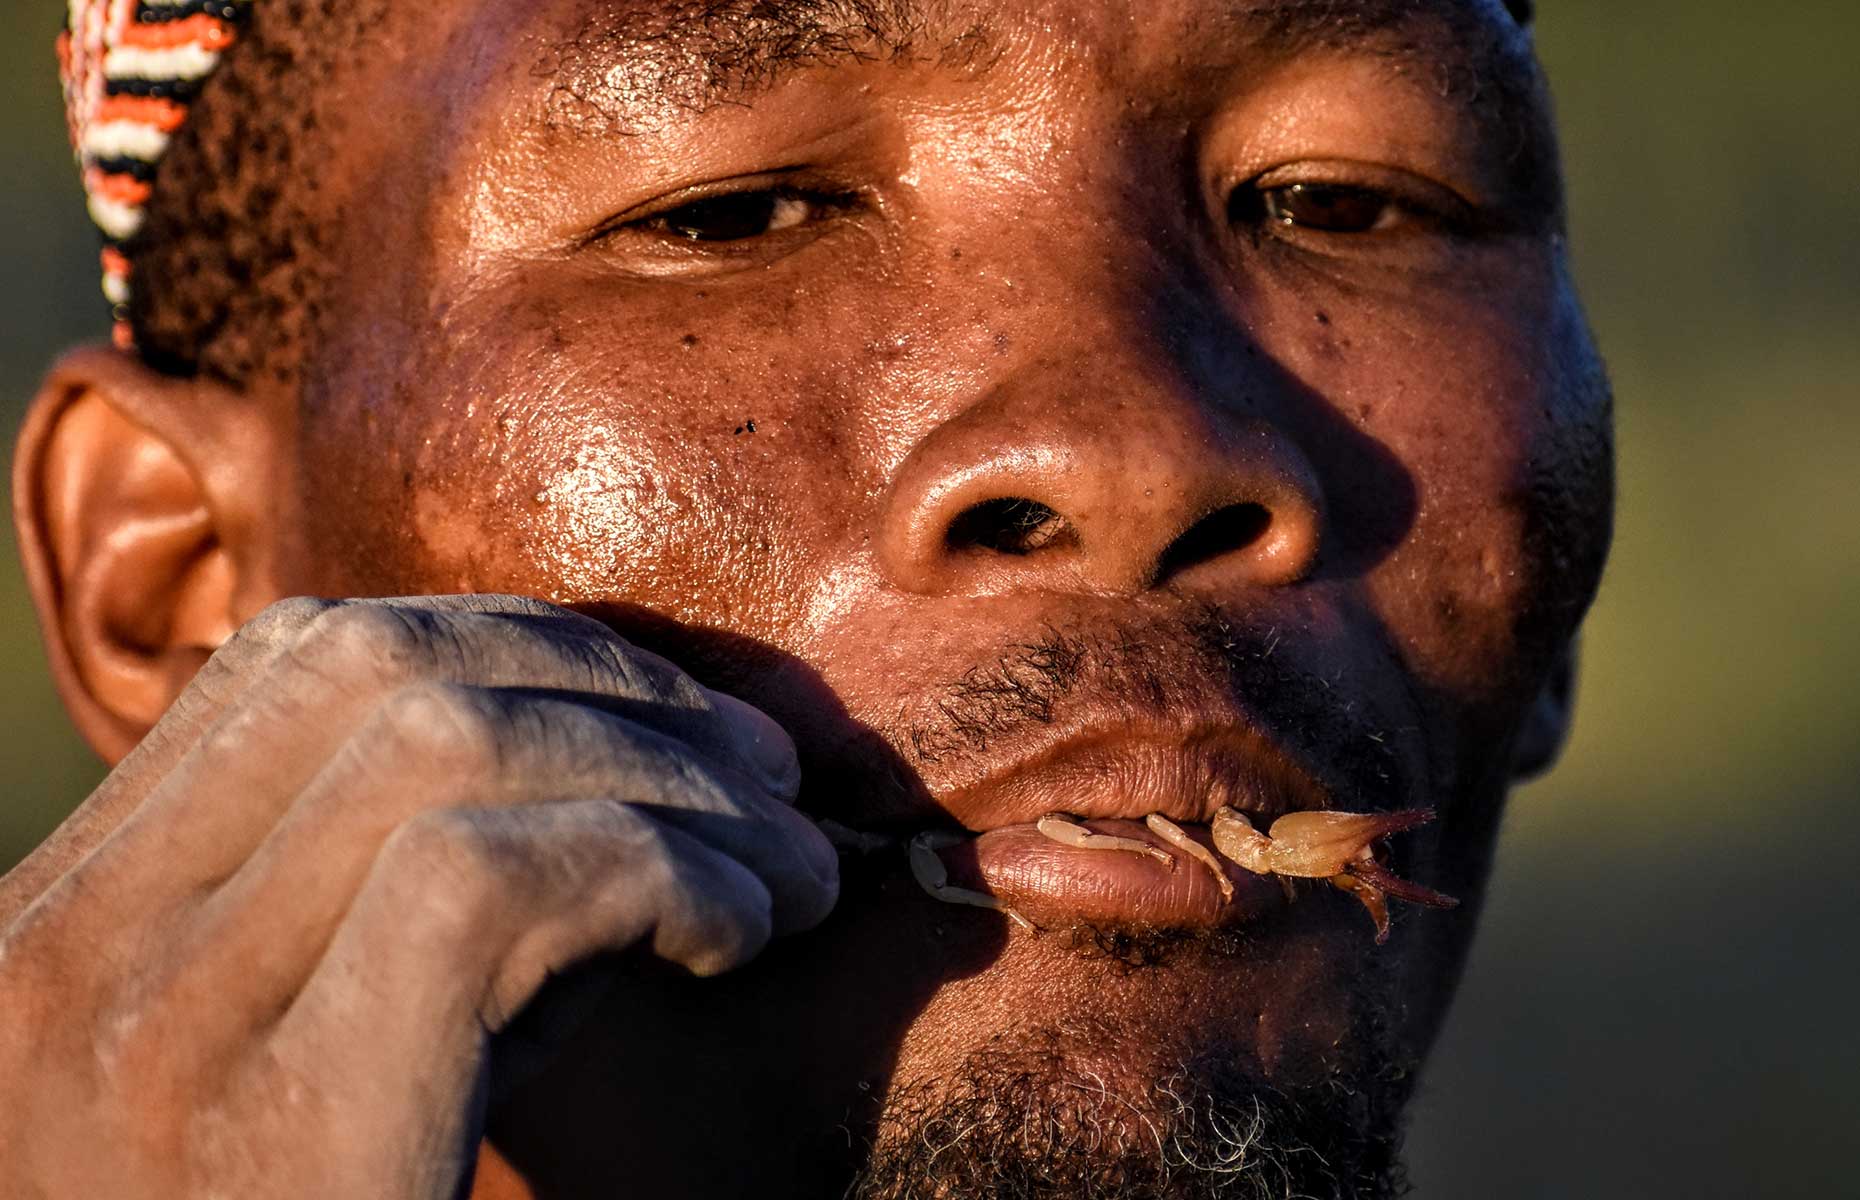 Botswana guide Xhanse puts a scorpion in his mouth (Image: James Draven)